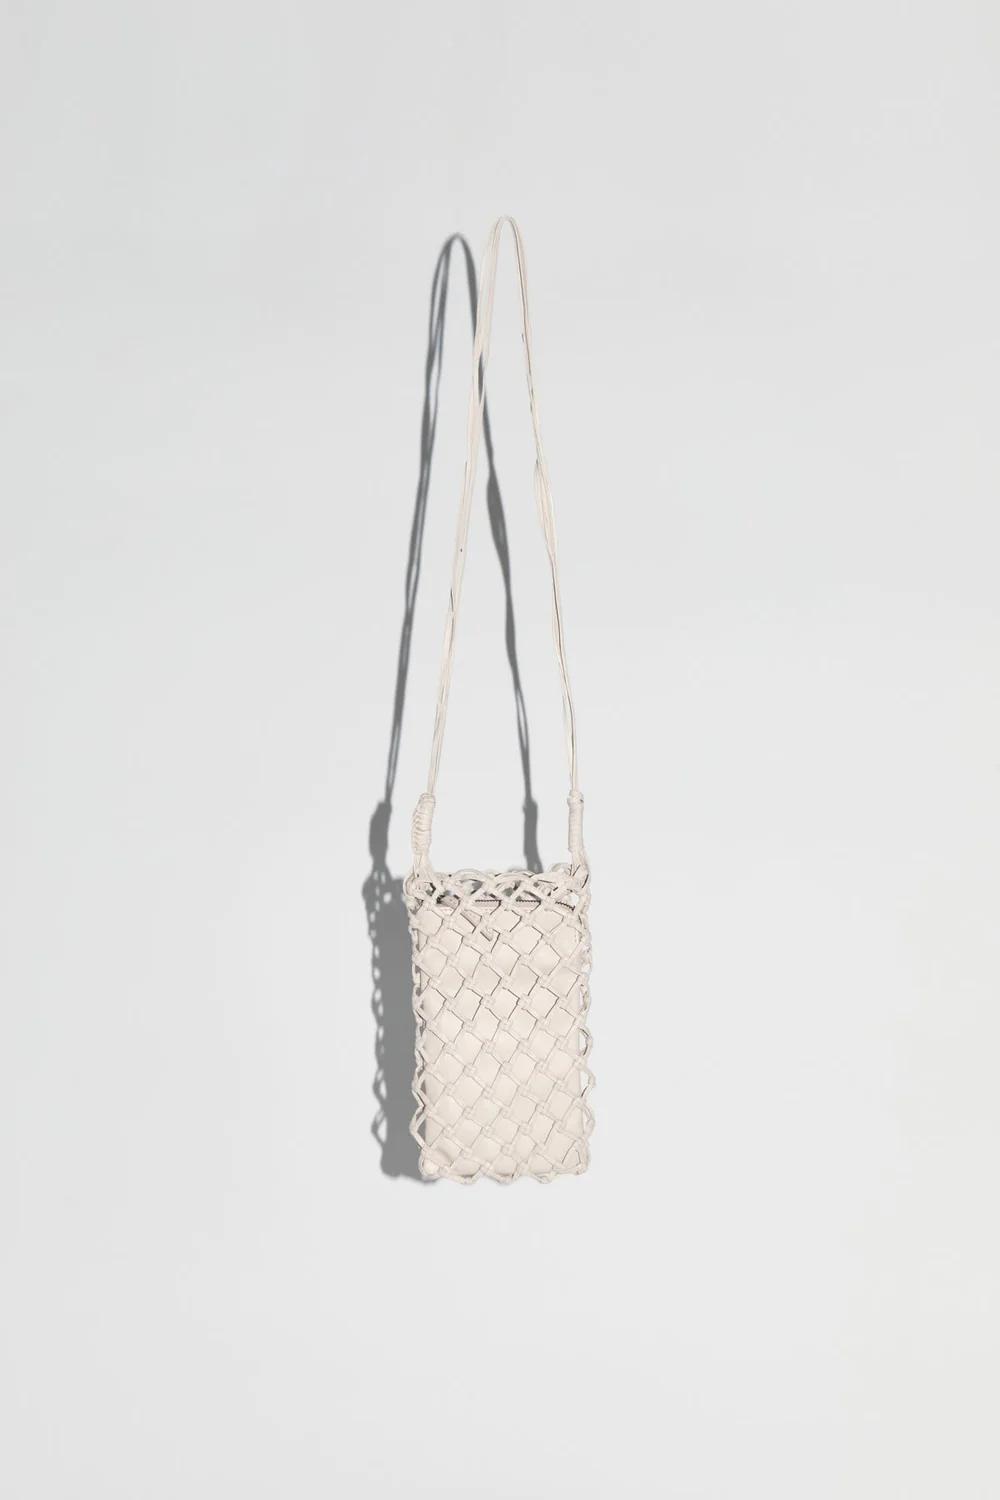 Product Image for Macrame Sling Pouch, Ecru